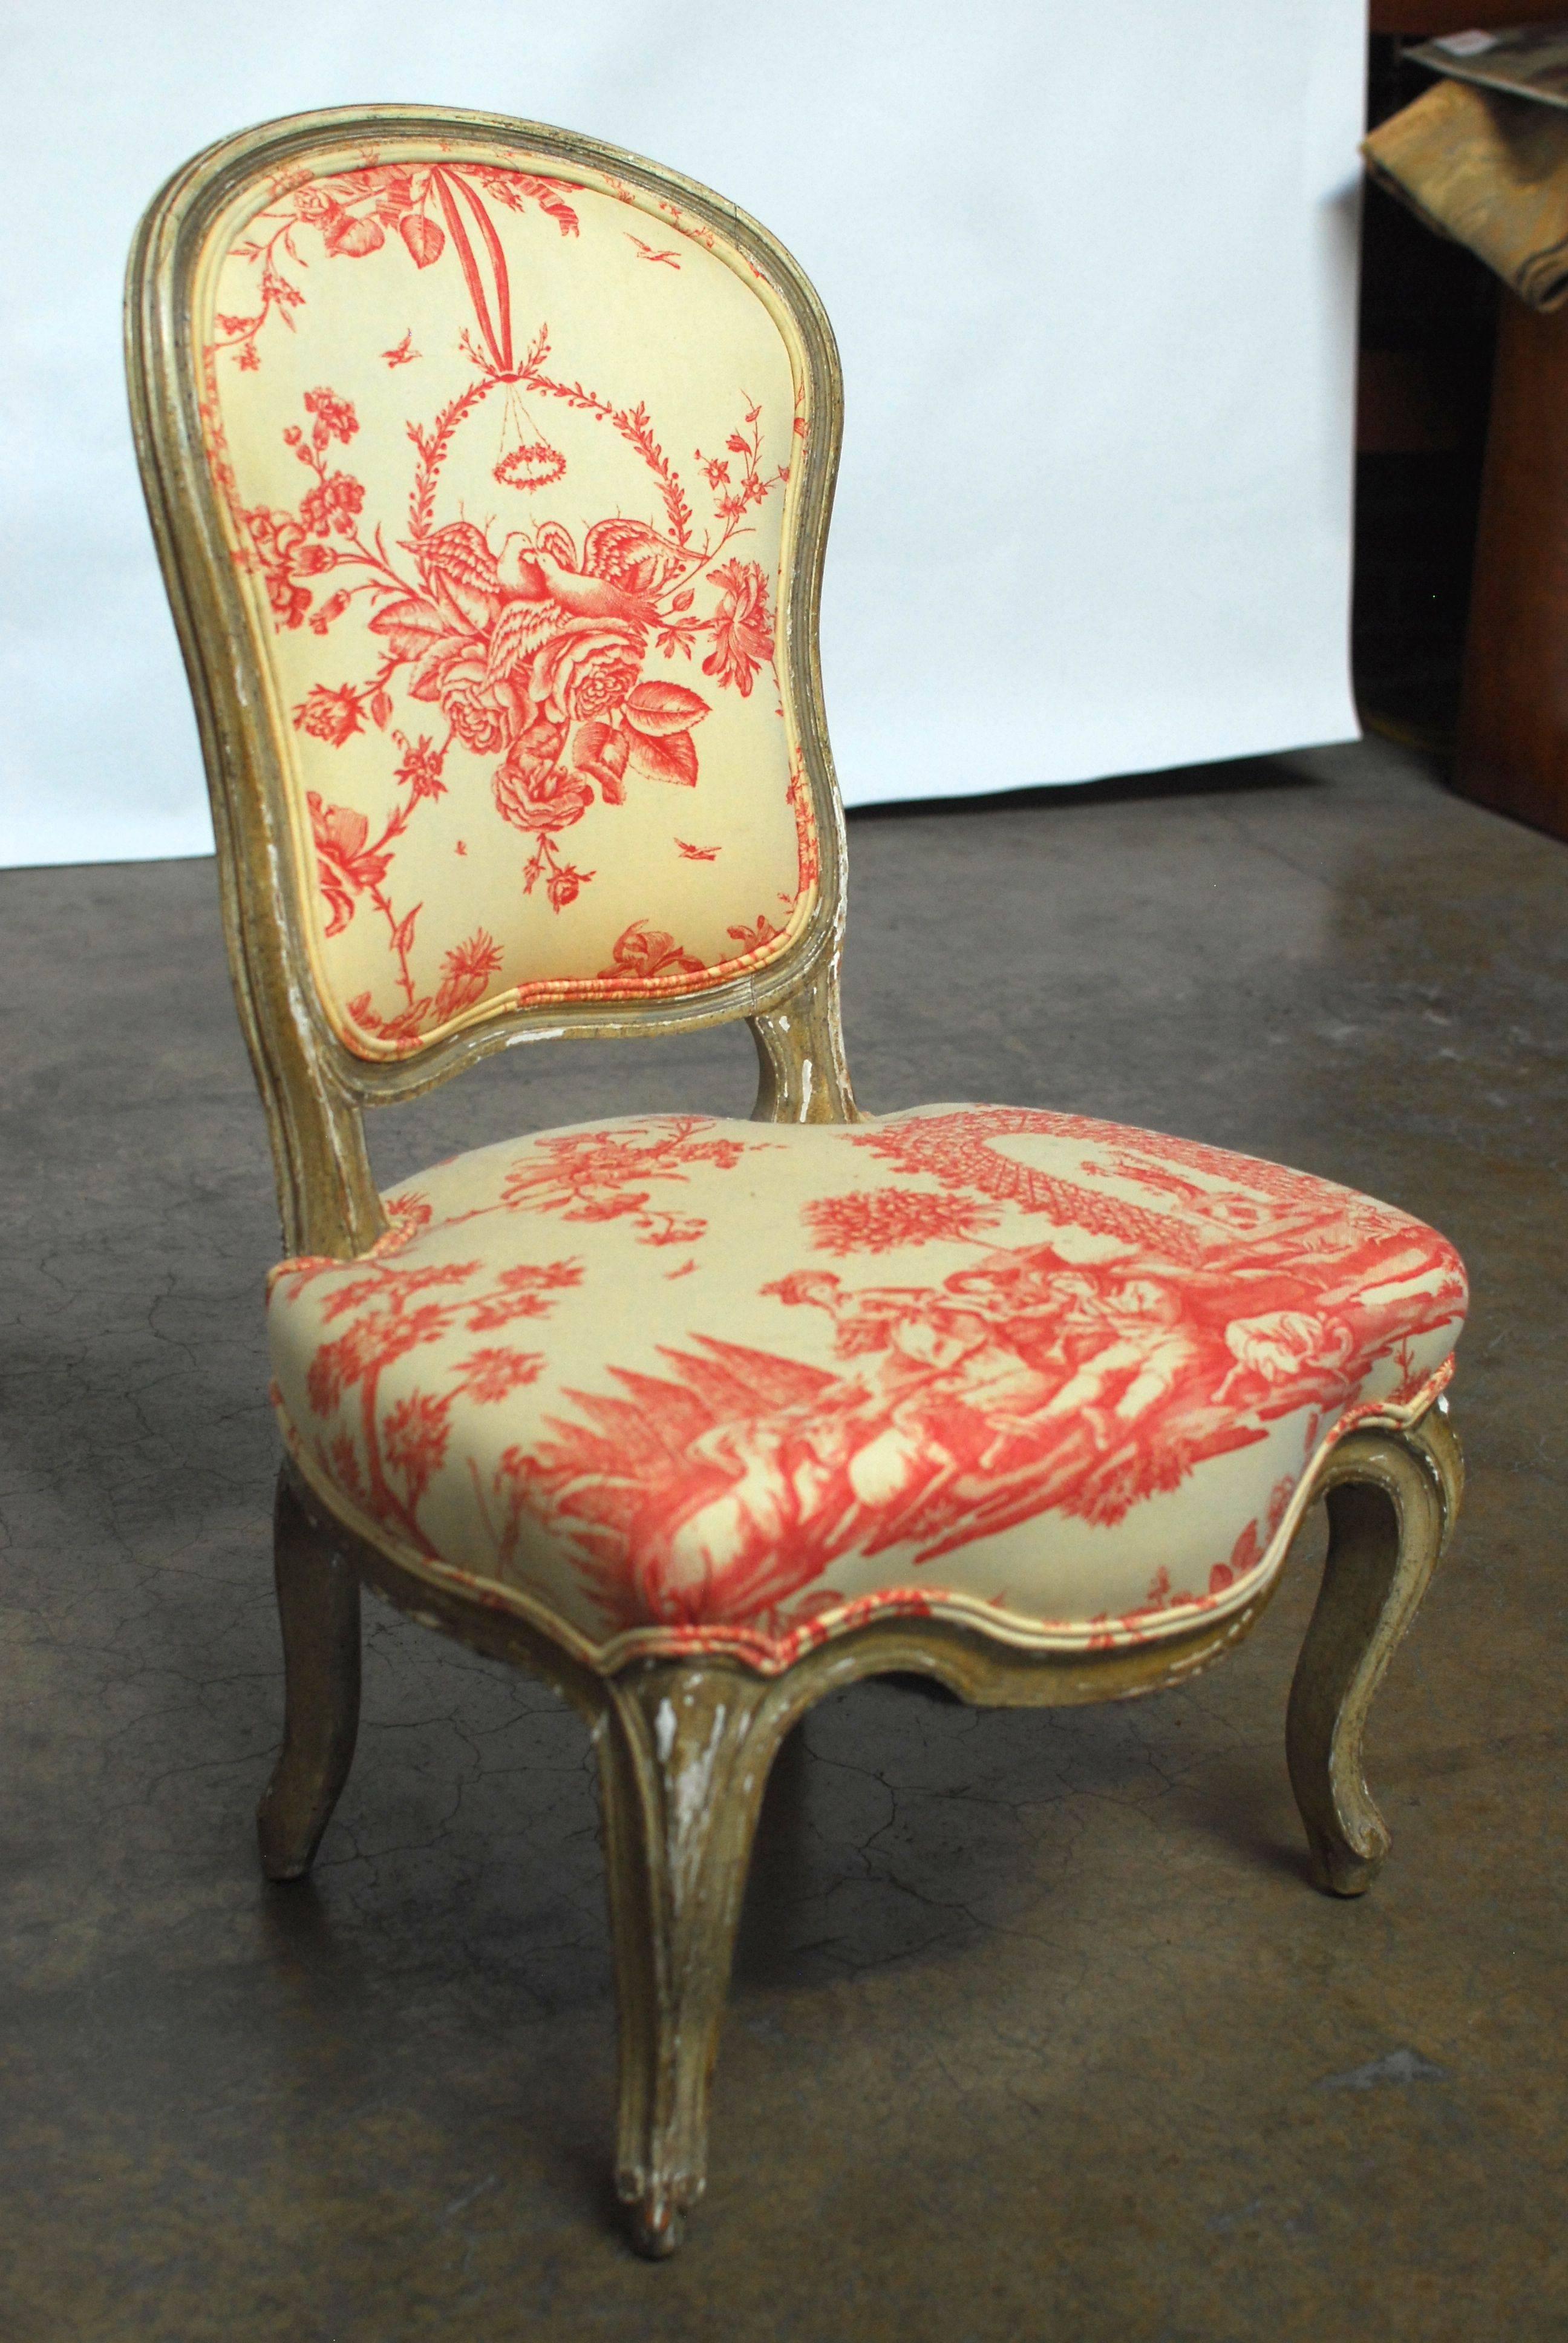 French Louis XV style slipper or boudoir chair featuring a serpentine carved frame and cabriole legs. Upholstered in a red and cream toile fabric with a double welt border. Frame has original unrestored finish and tight joinery. From the Pebble